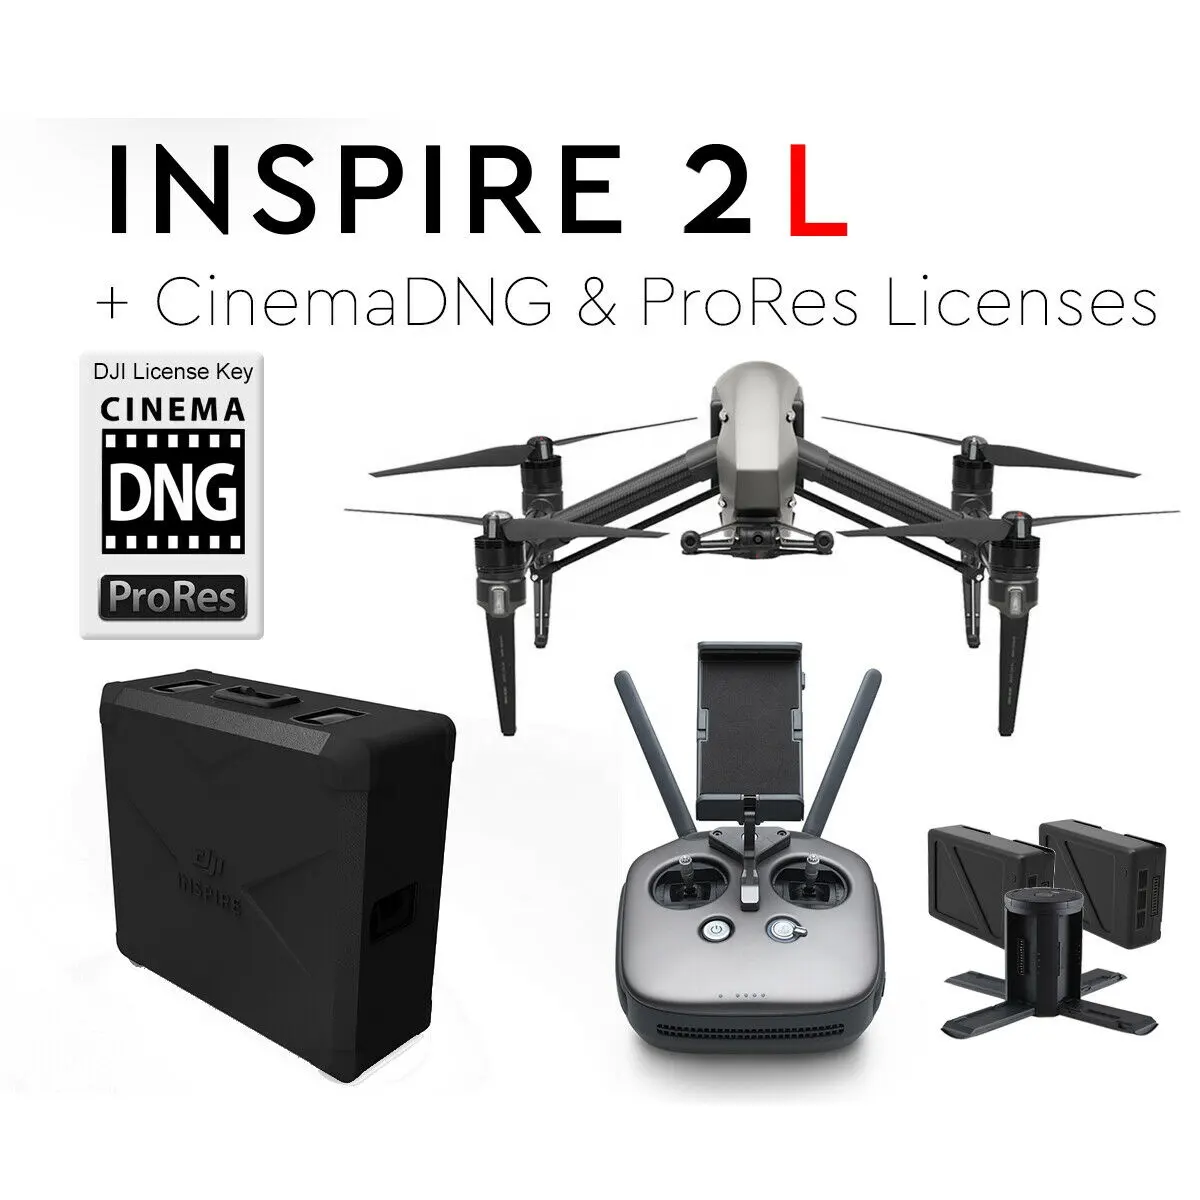 100% Original and Brand New Sealed for DJI INSPIRE 2 (L) Drone CinemaDNG & Appl e ProRes Licenses